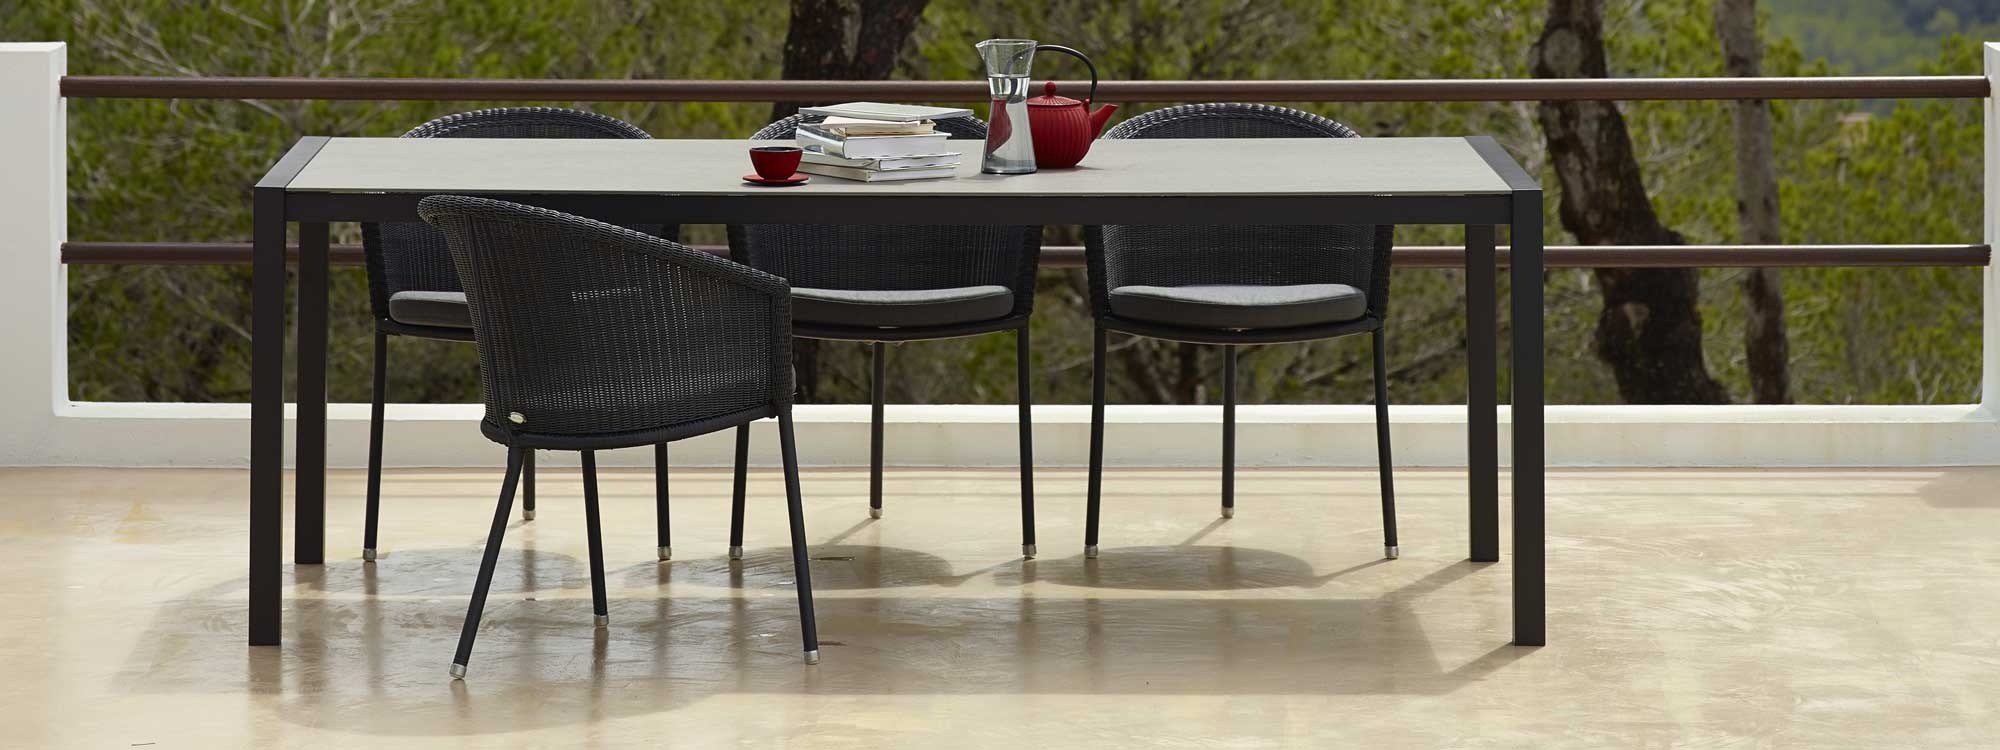 Image of Trinity 3 legged garden chairs in graphite Cane-line weave by Caneline garden furniture company